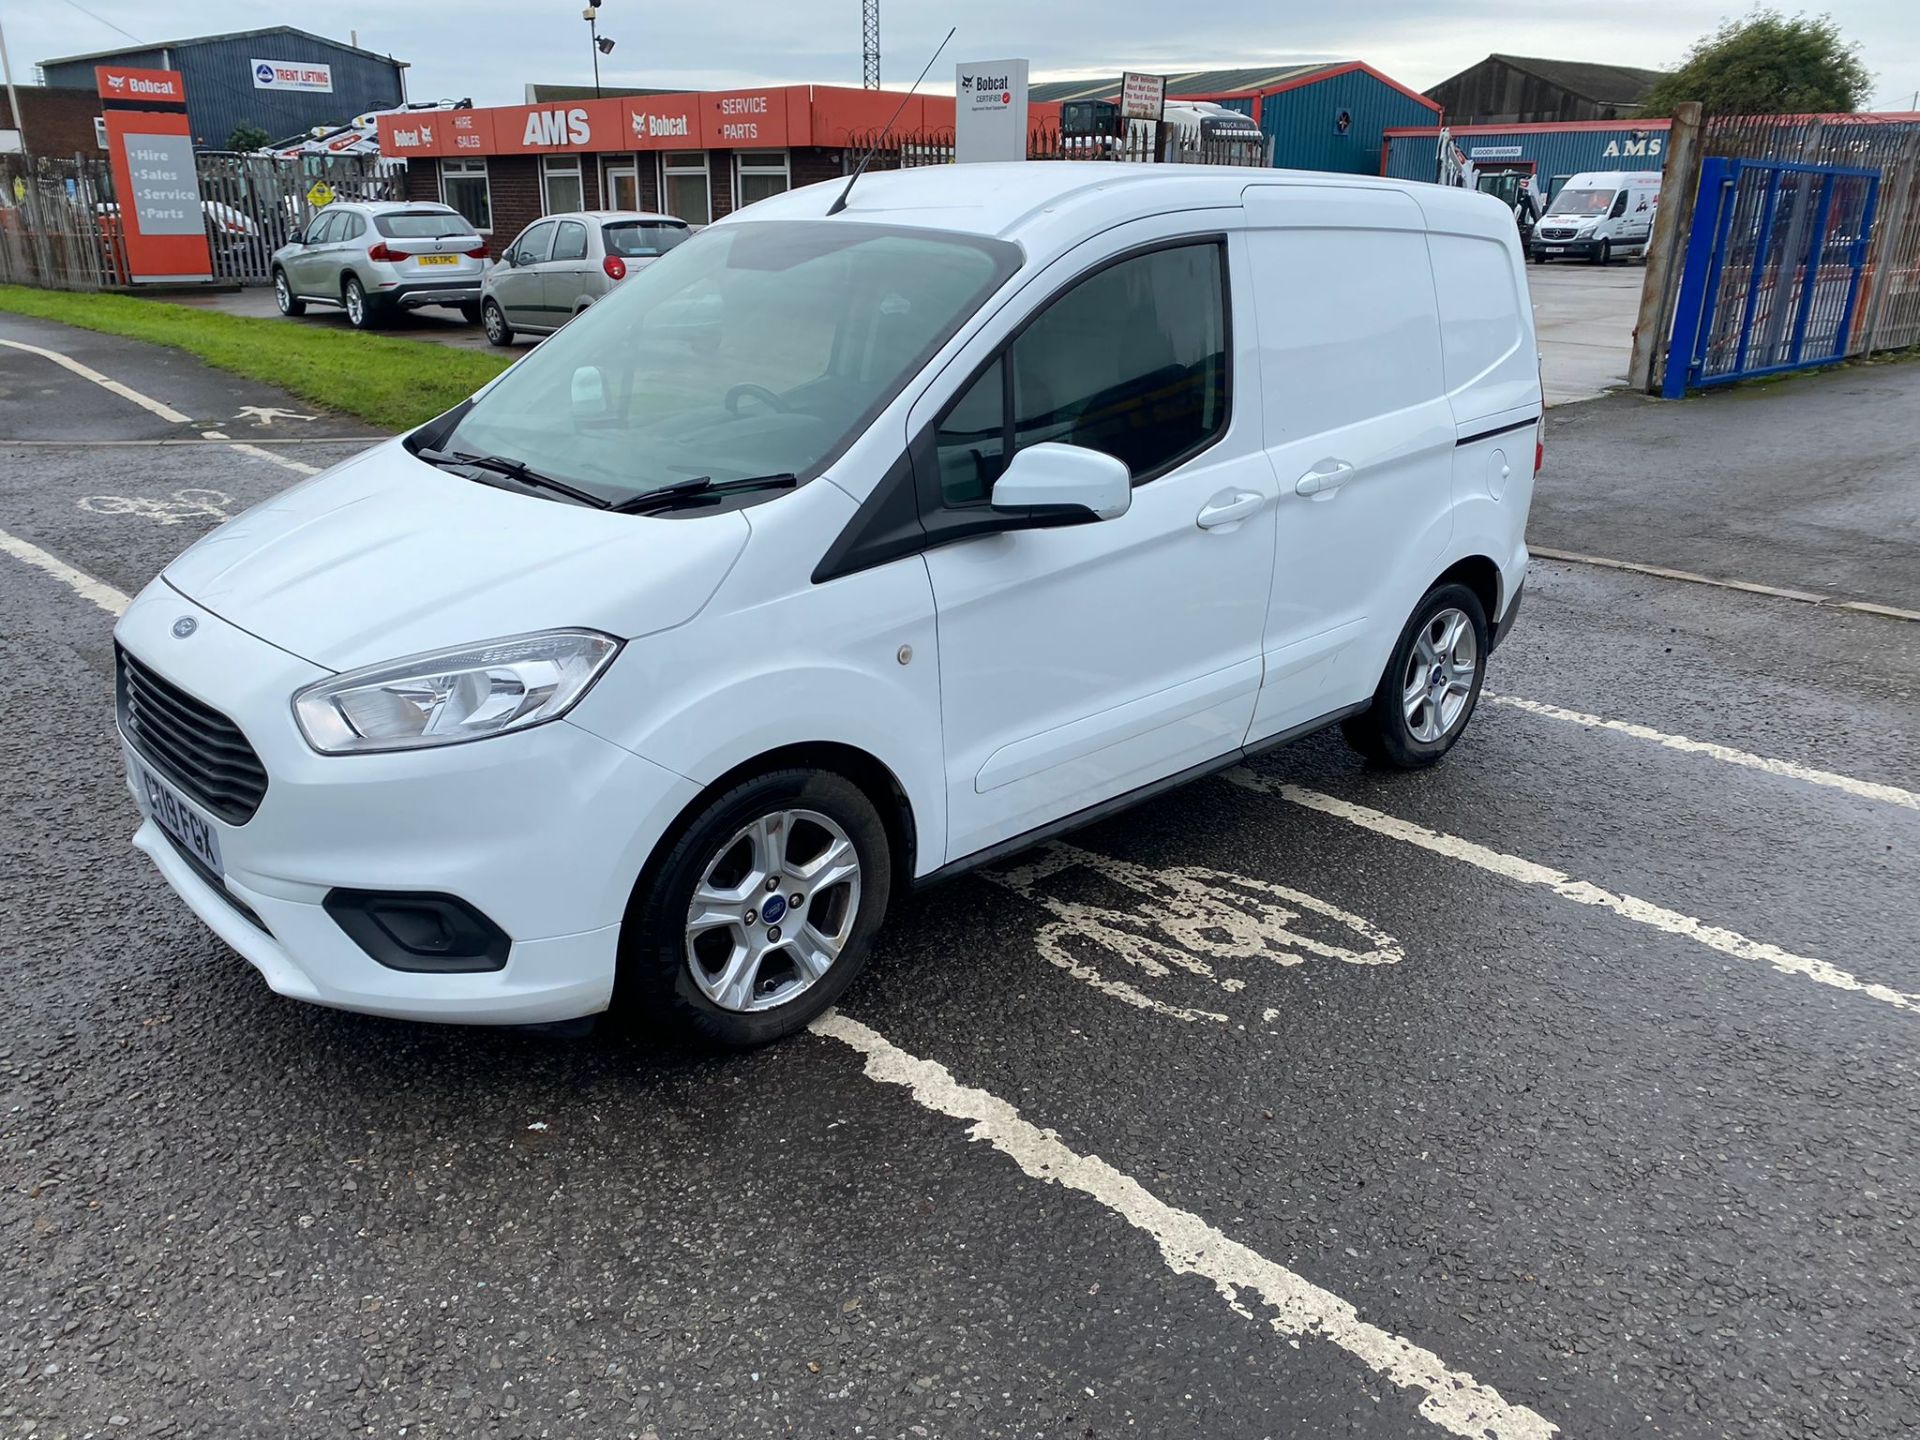 2019 19 FORD TRANSIT COURIER LIMITED PANEL VAN - ALLOY WHEELS - AIR CON - EURO 6. - Image 3 of 10